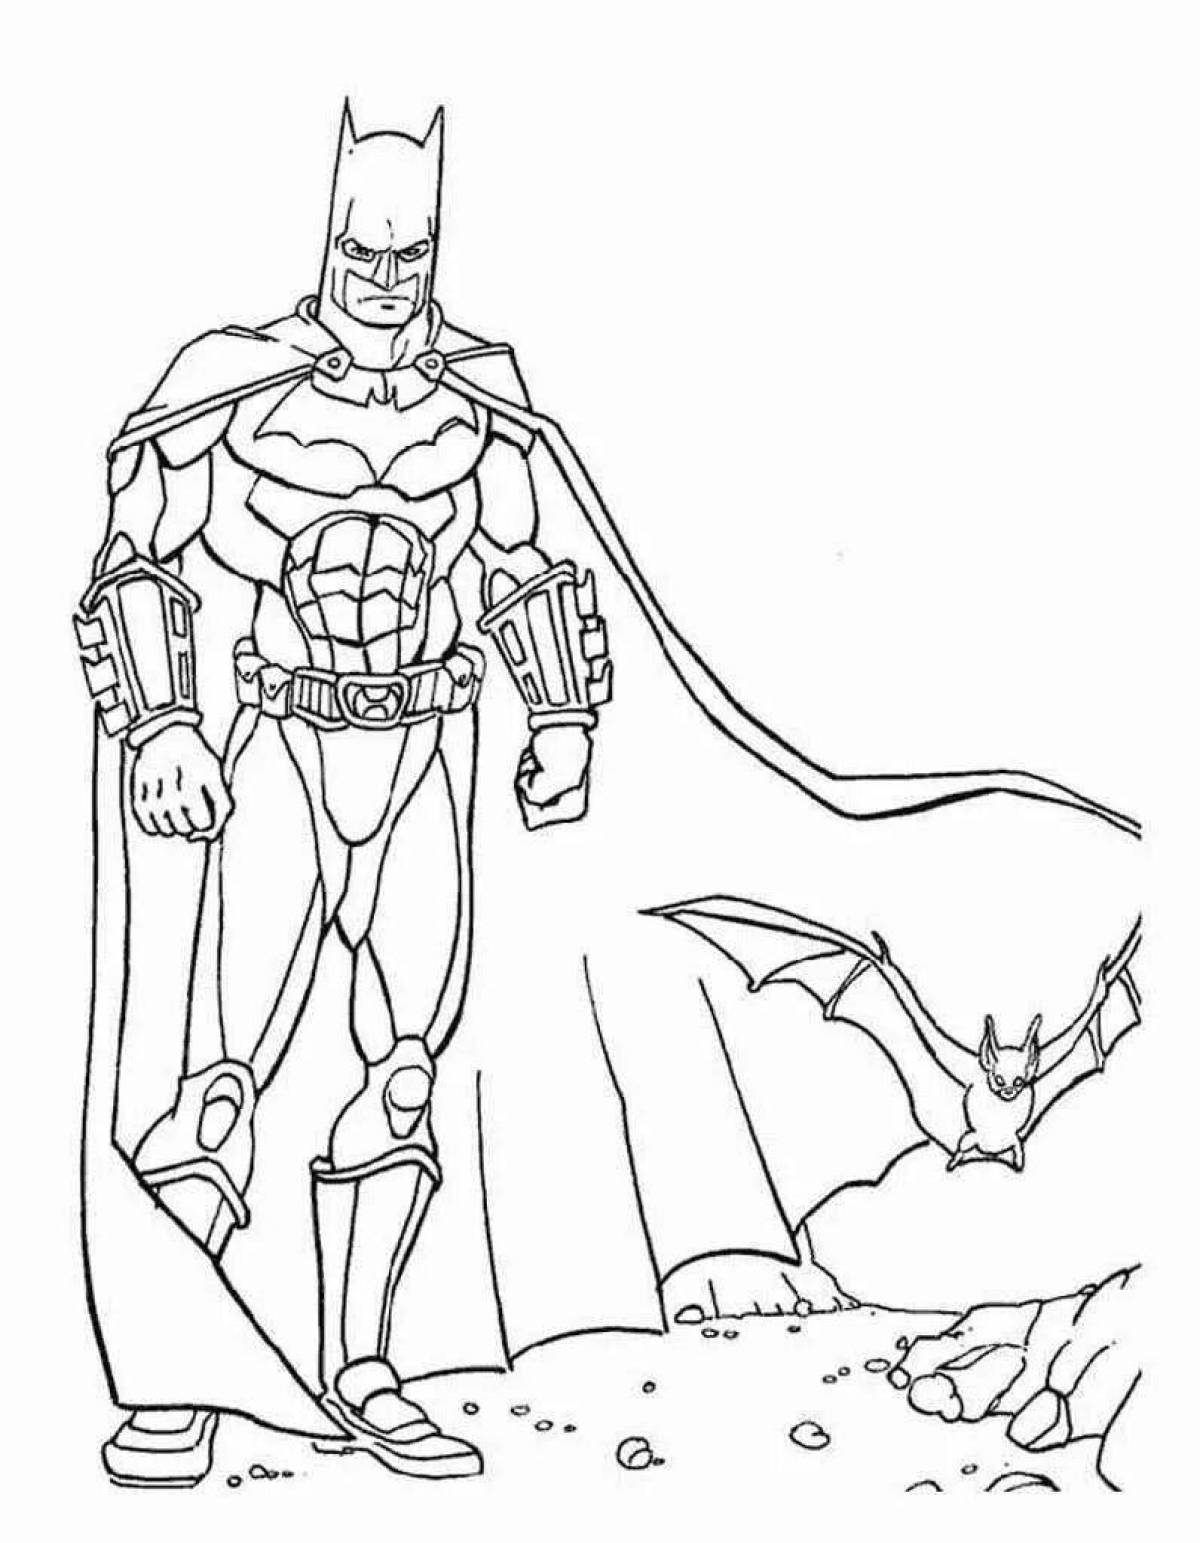 Fun superhero coloring pages for kids 6-7 years old